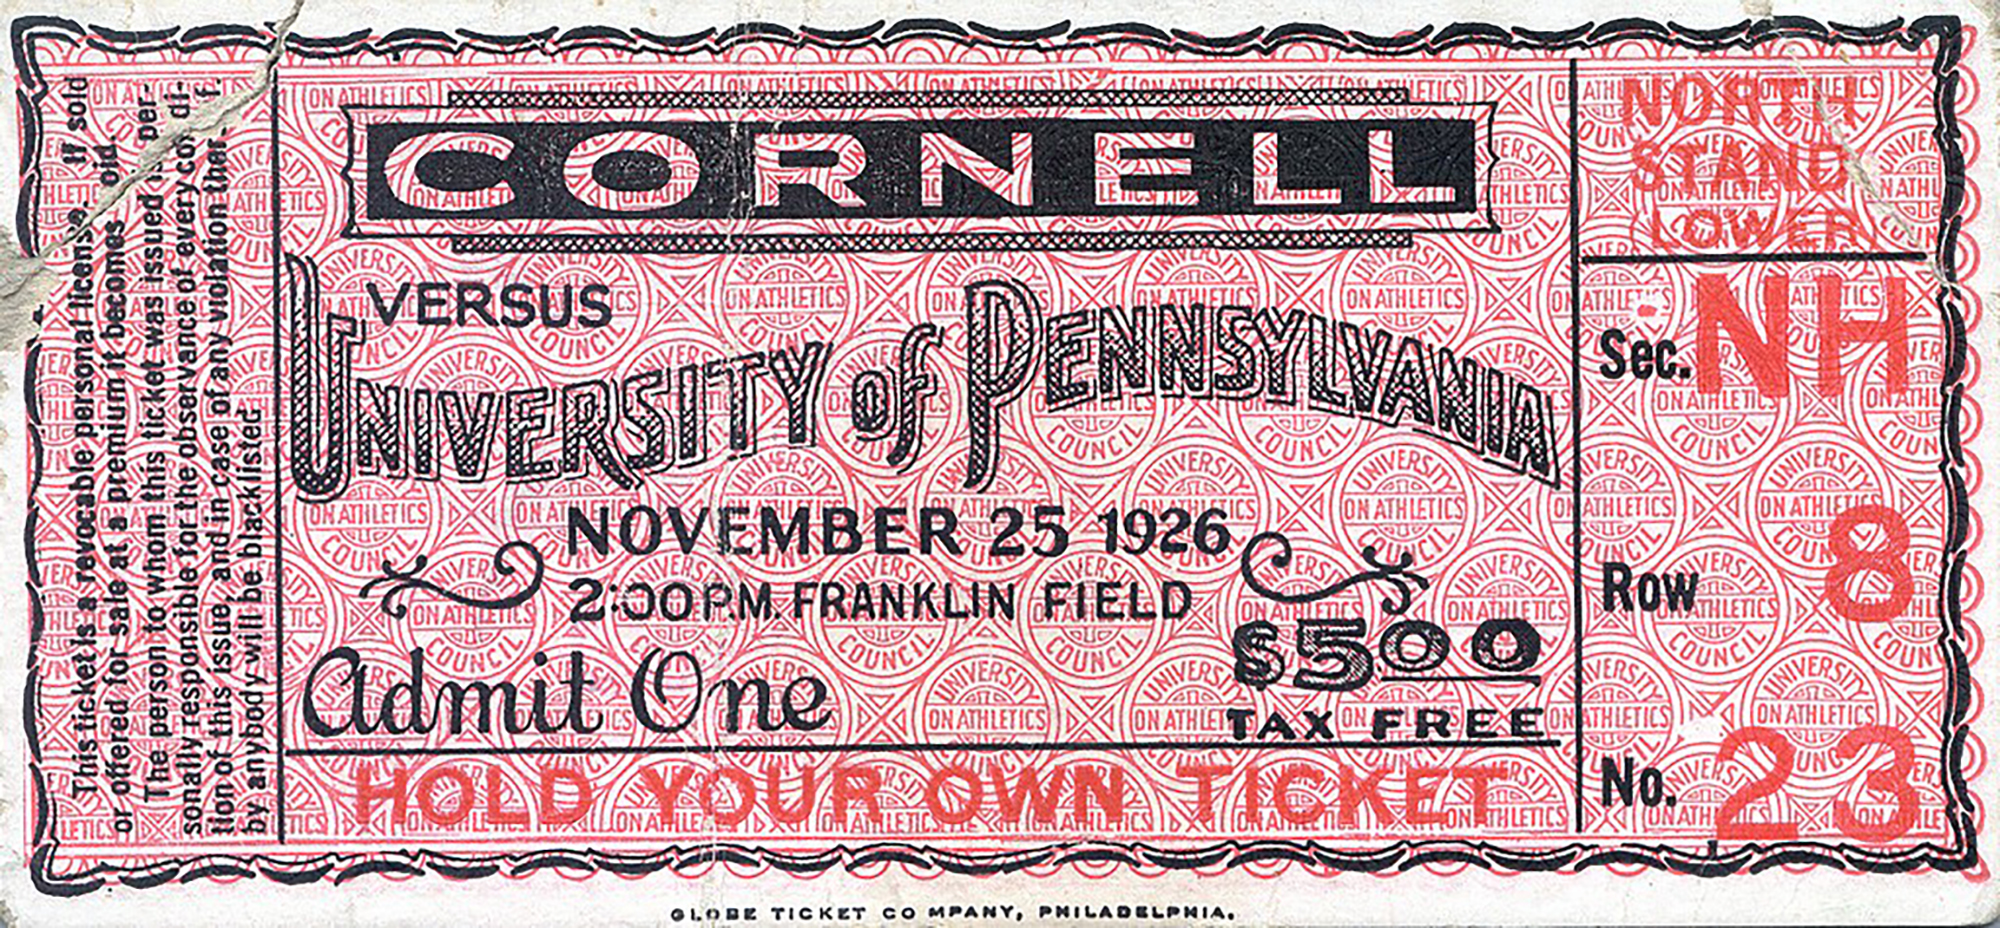 An admission ticket to Cornell vs. Penn Thanksgiving game held on Nov. 25, 1926.